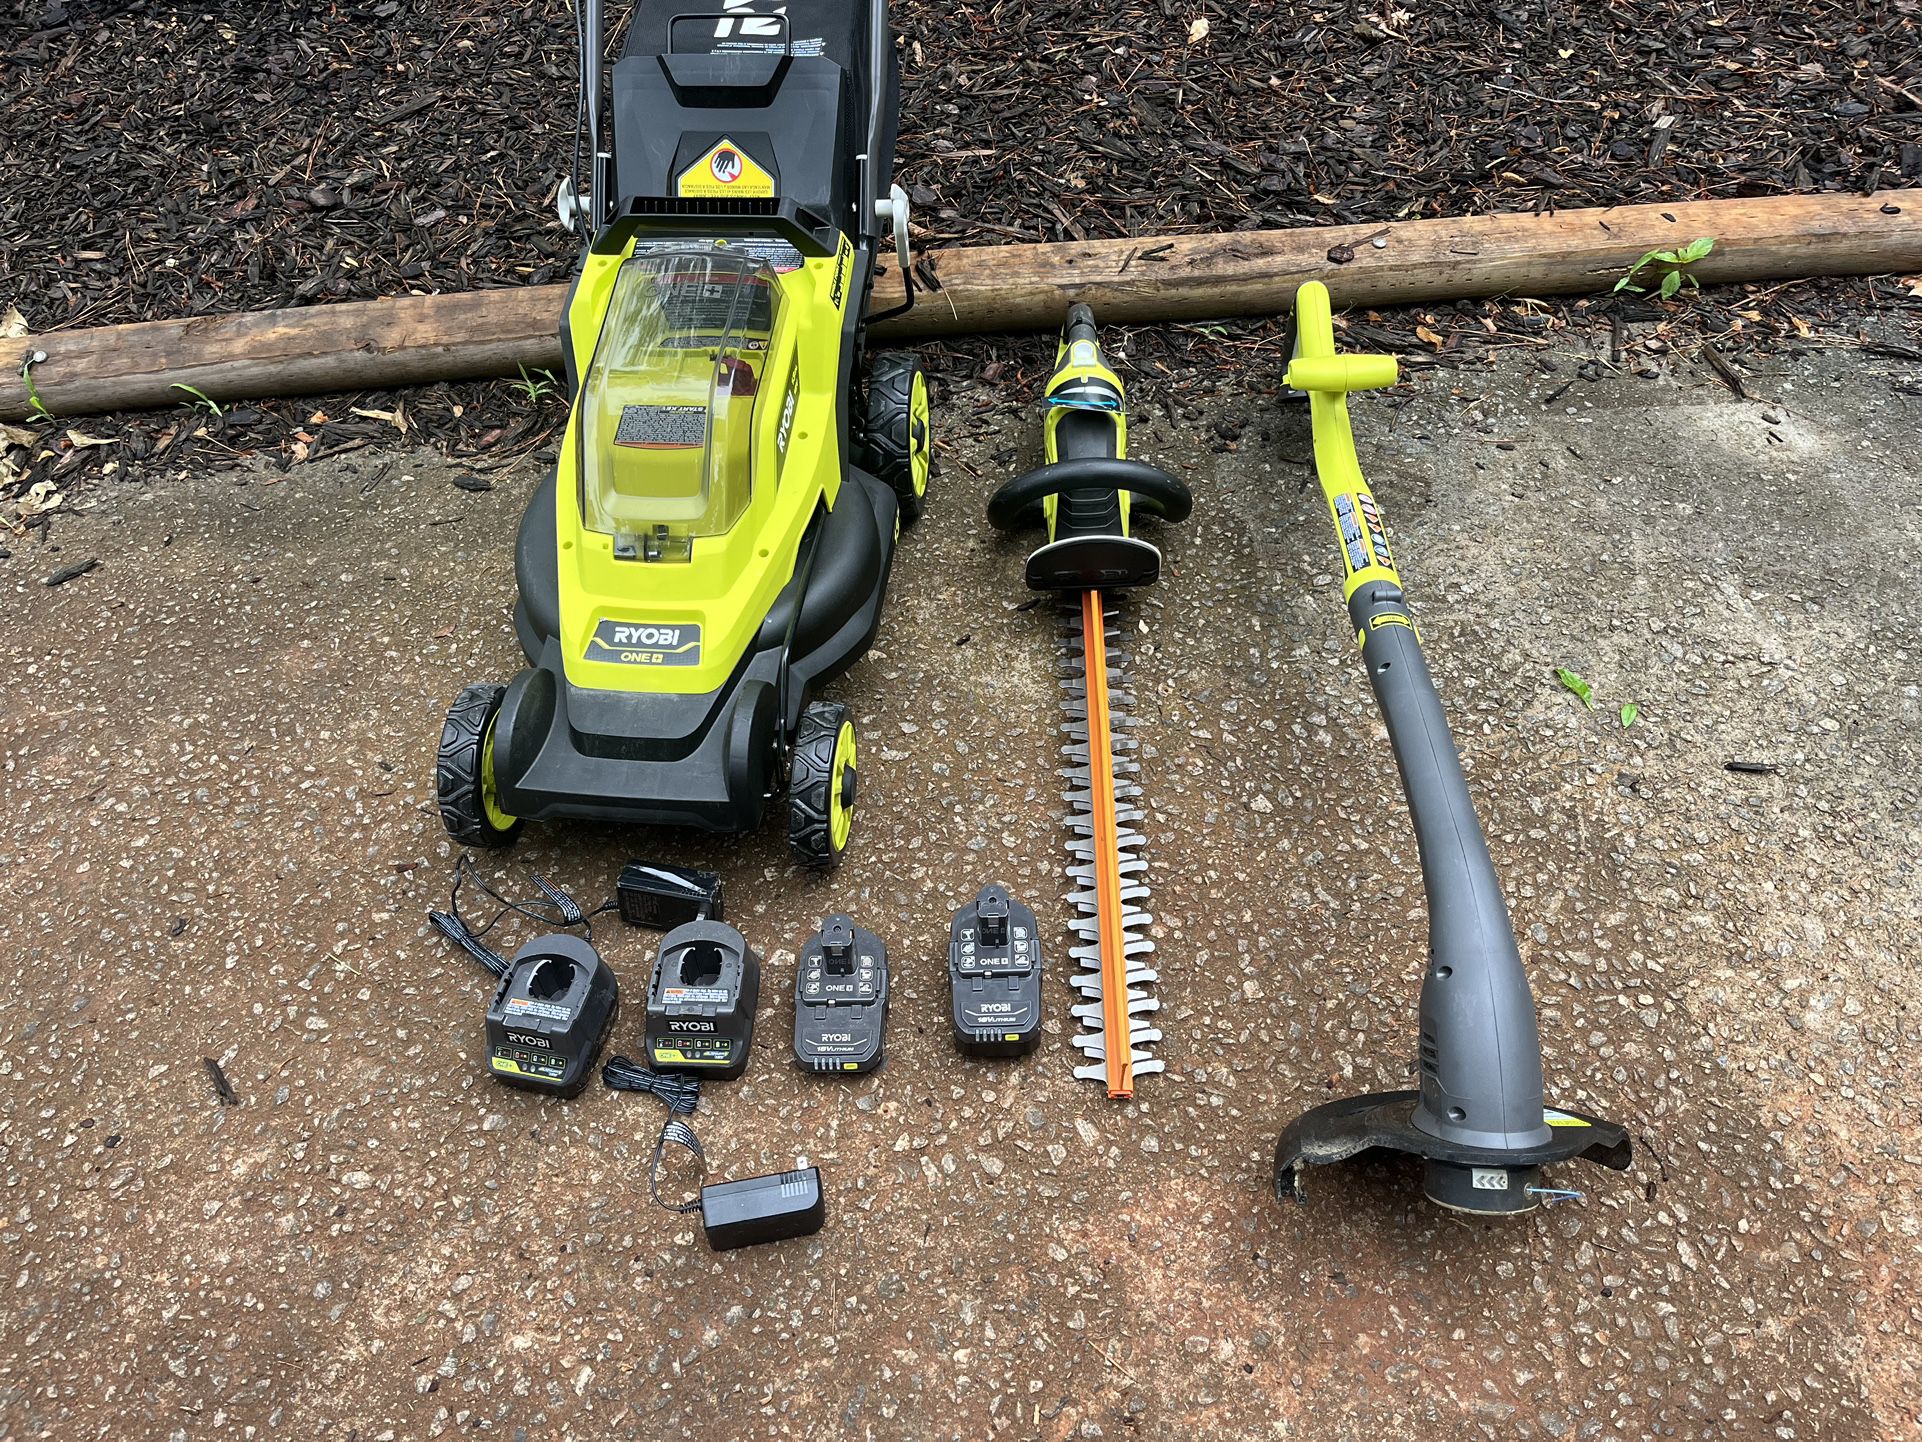 Ryobi 18 V 13 inch lawnmower, string trimmer hedge trimmer two batteries two charger used 160